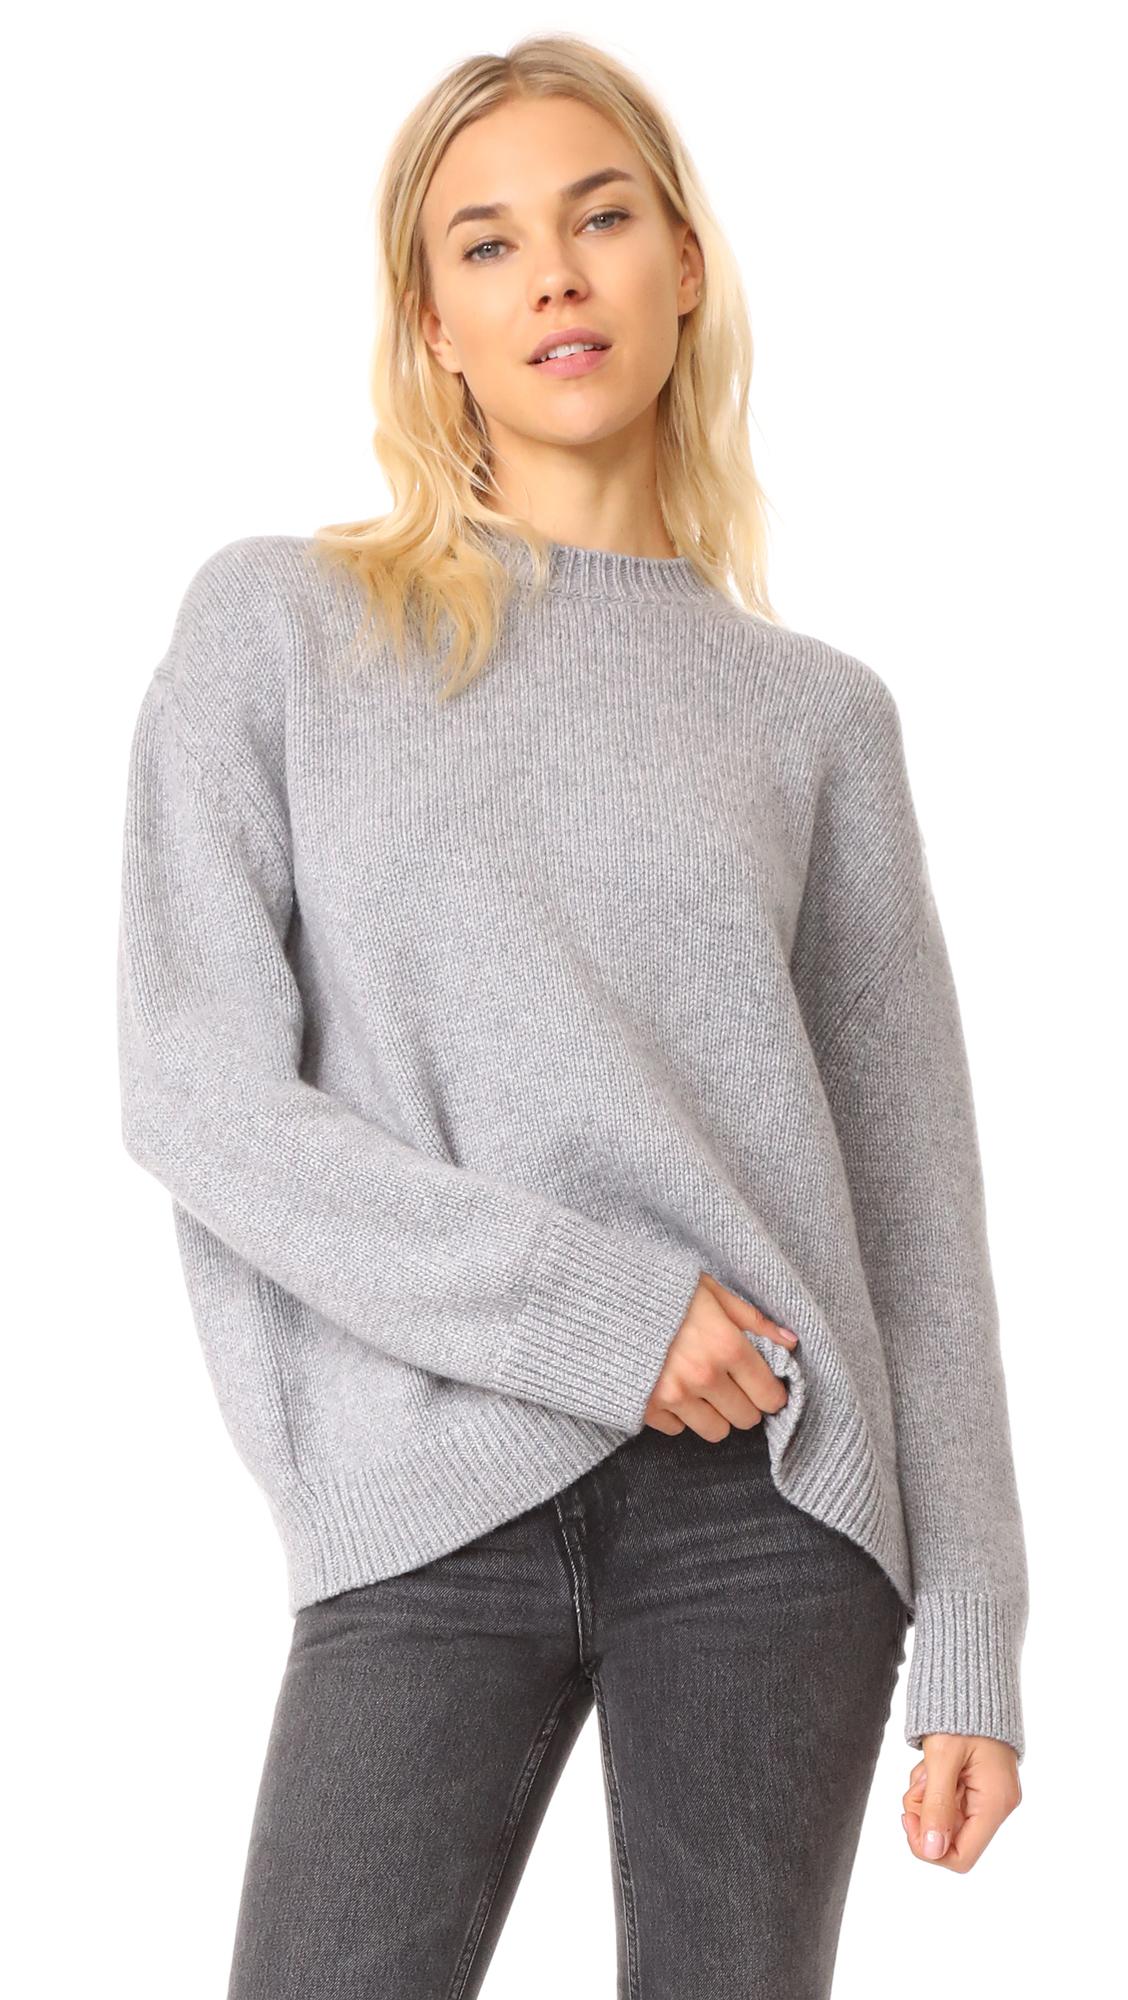 Lyst - Anine bing Cashmere Chunky Knit Sweater in Gray